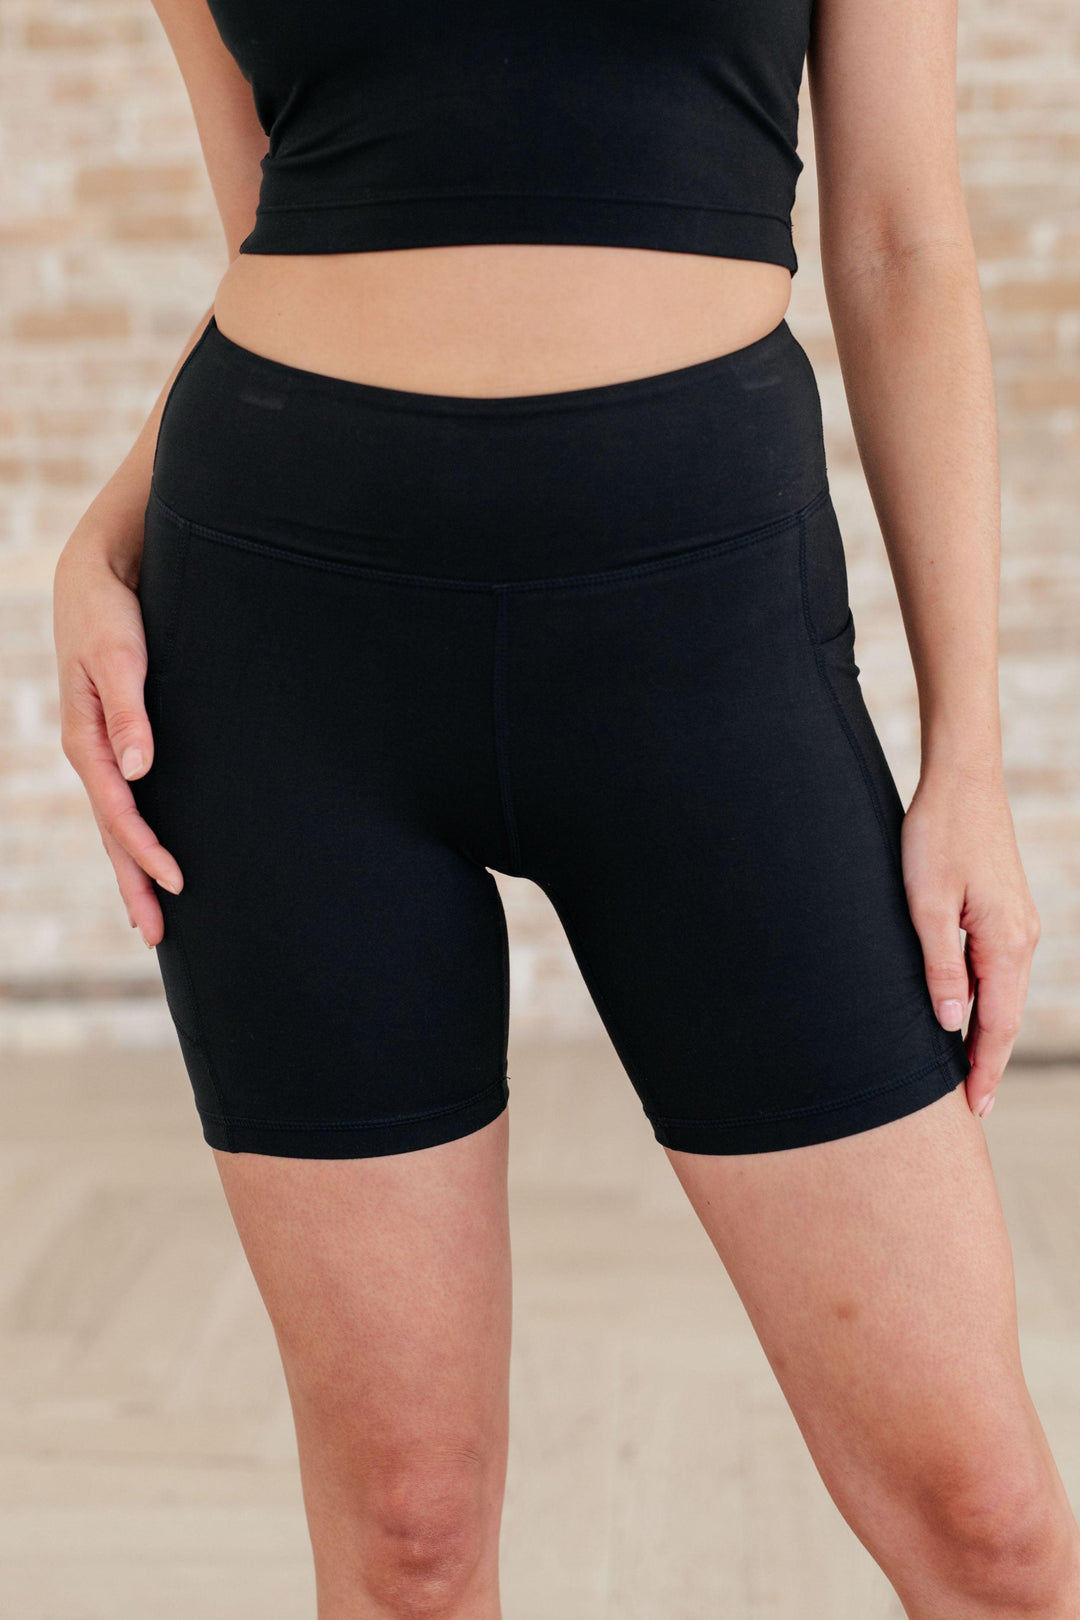 Getting Active Biker Shorts in Black Small Black Shorts